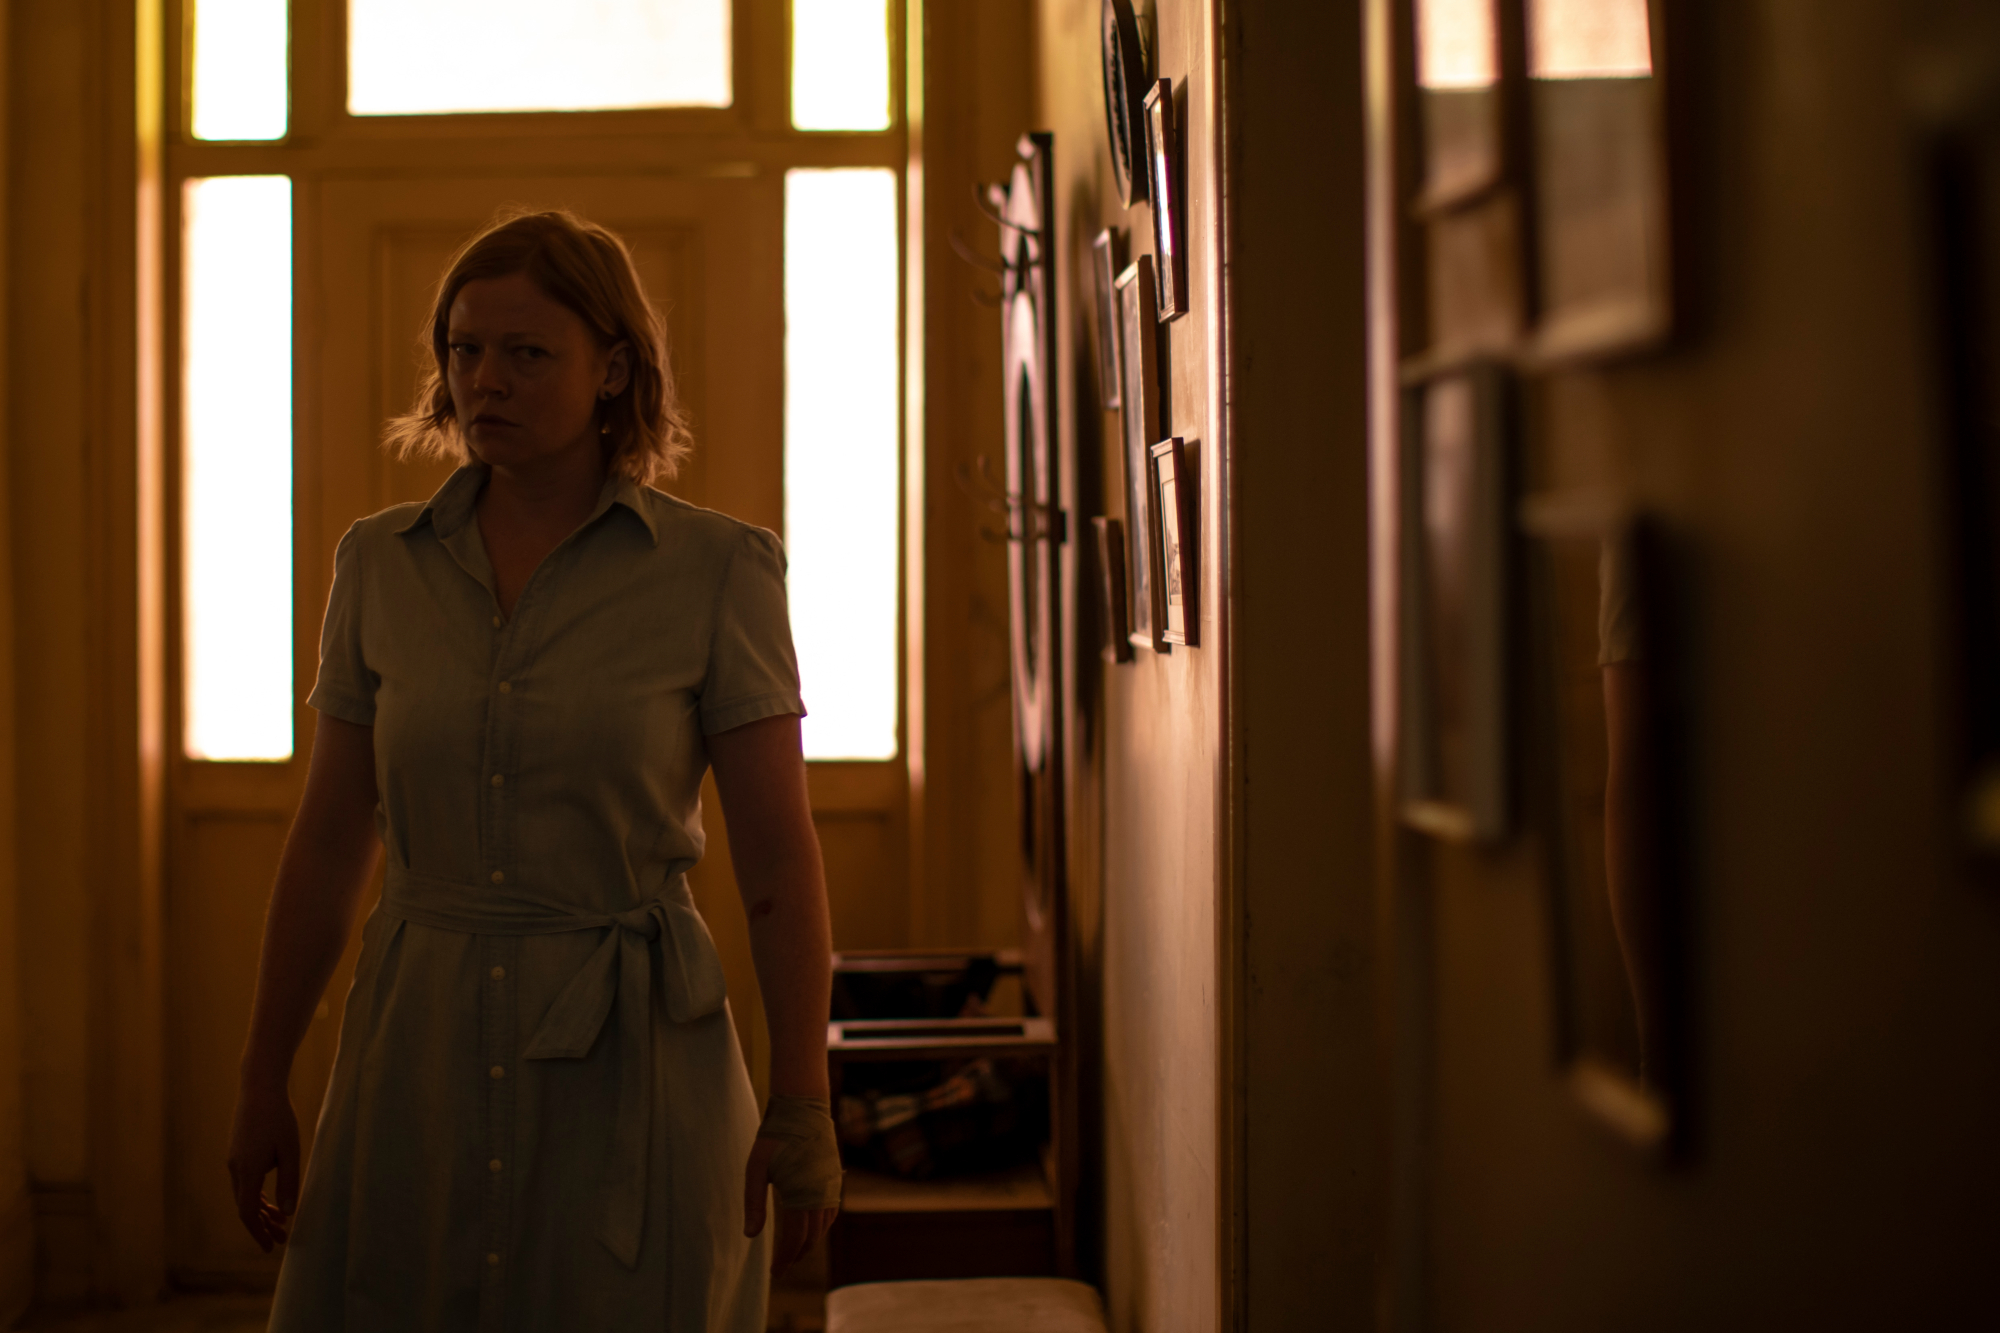 'Run Rabbit Run' Sarah Snook as Sarah looking worried, standing in a dark hallway with pictures on the wall